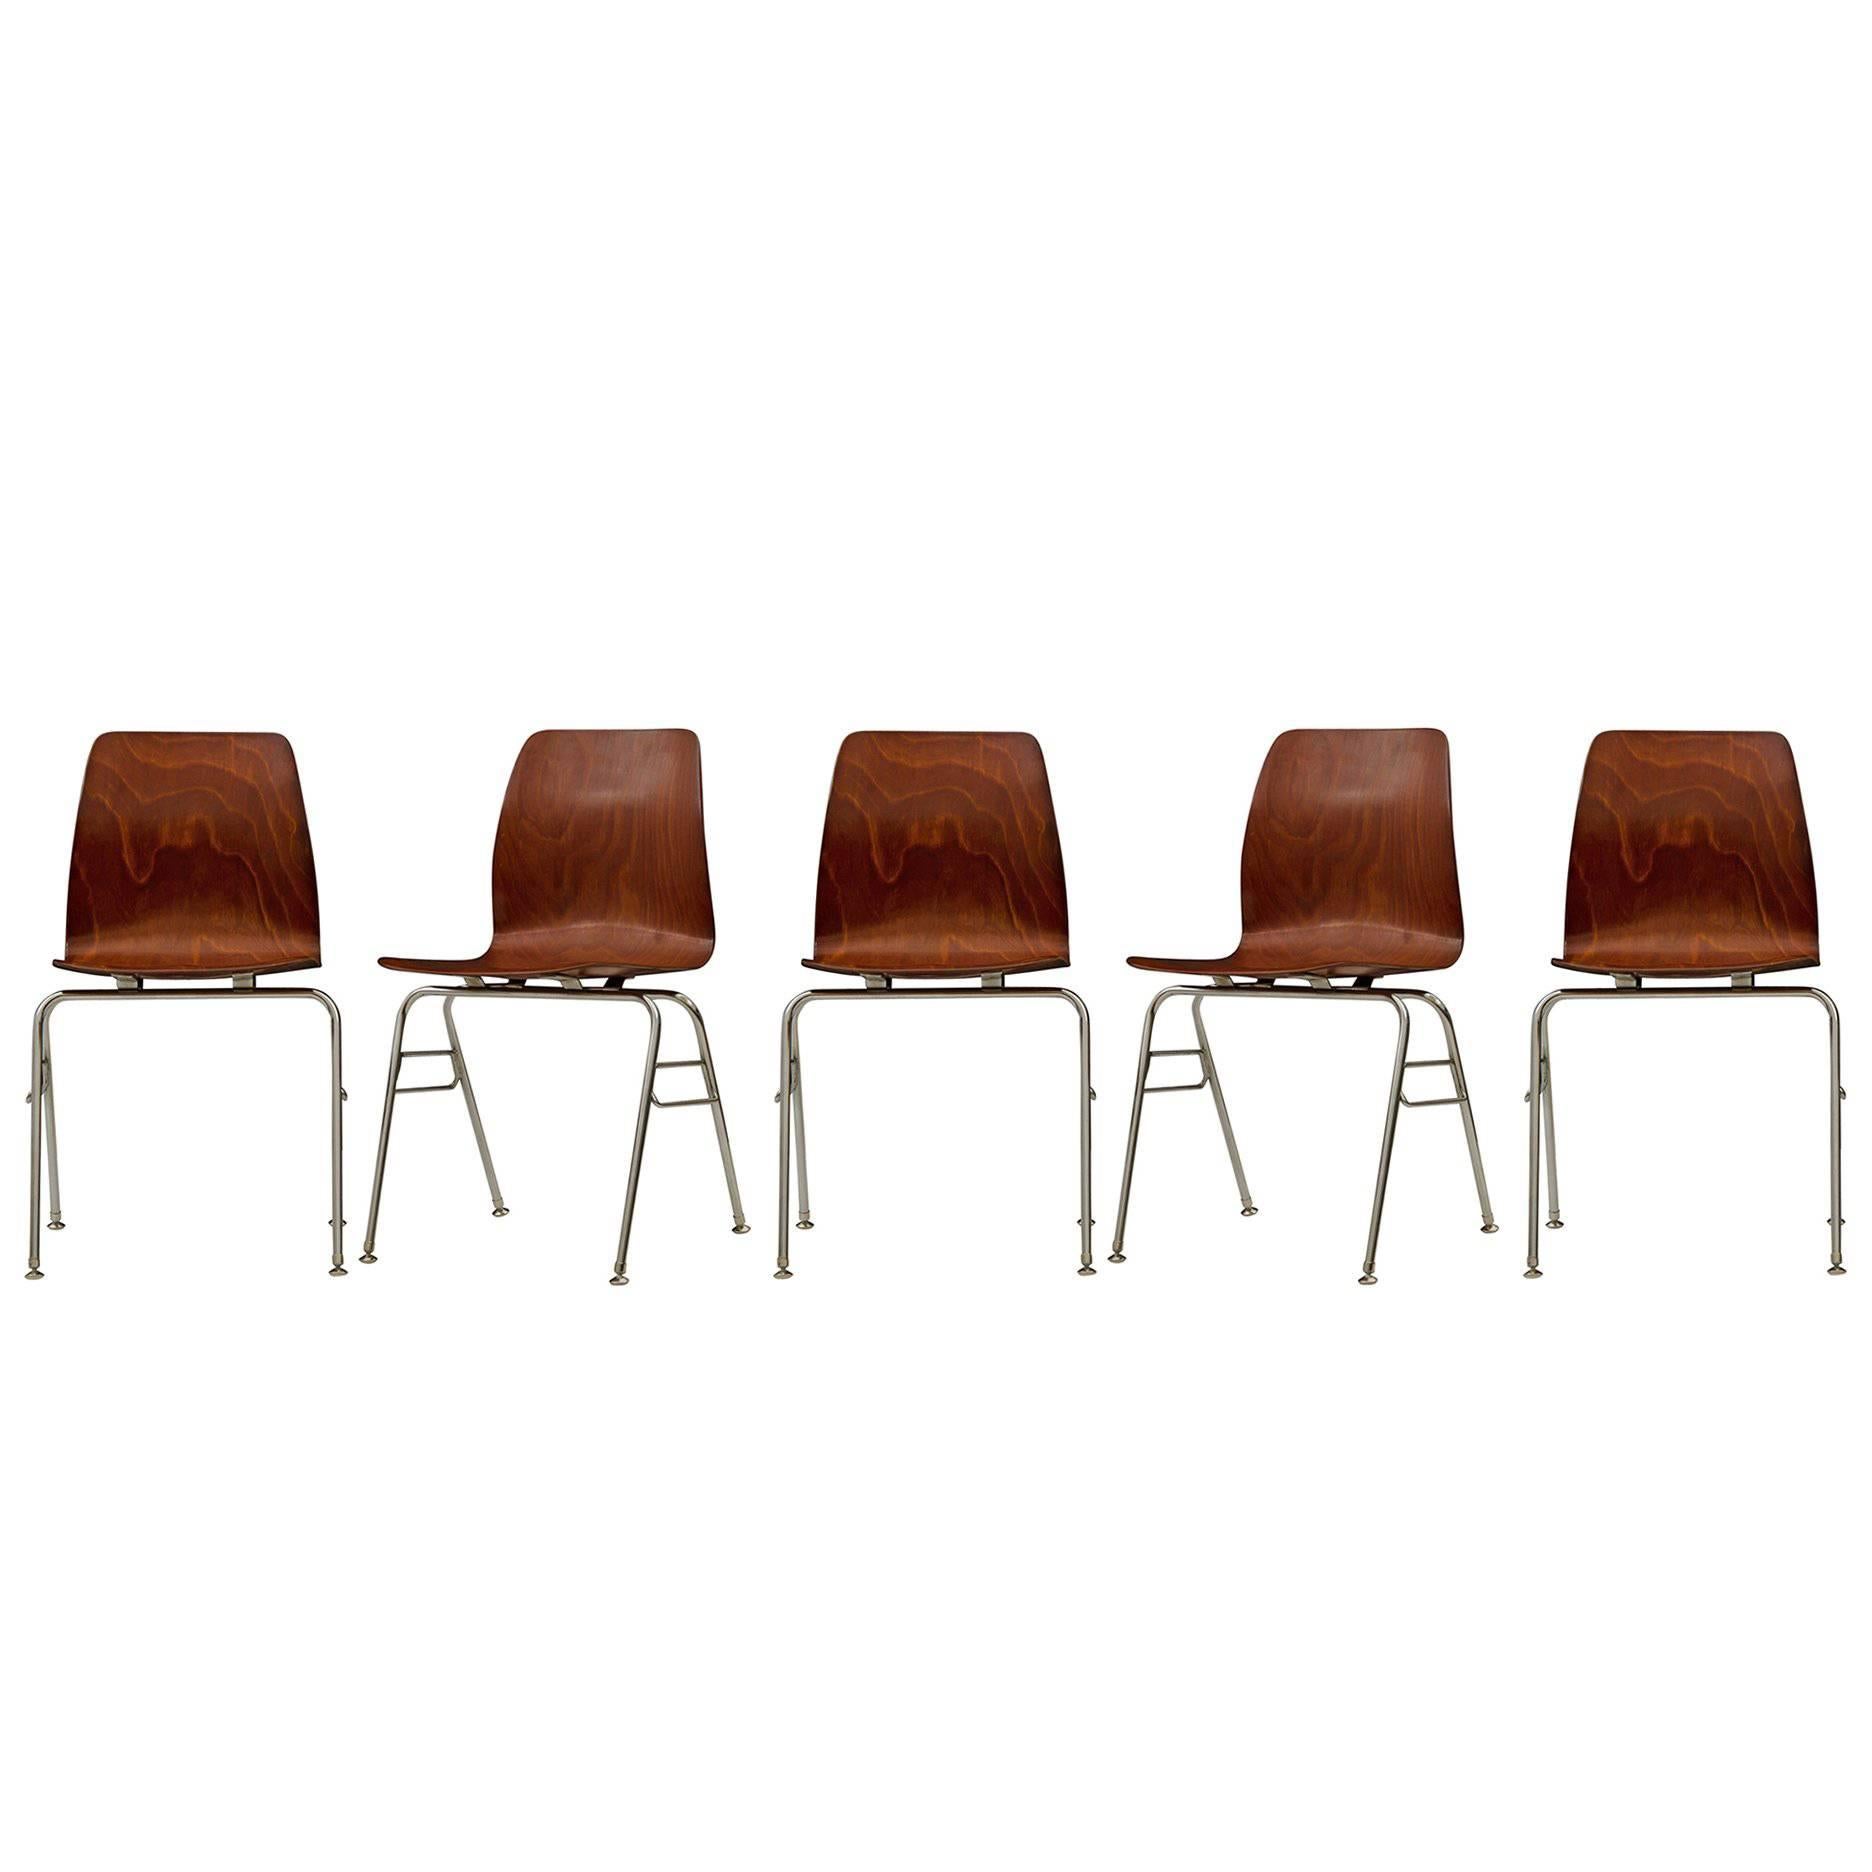 Set of Five Bent Plywood Chairs, circa 1960s